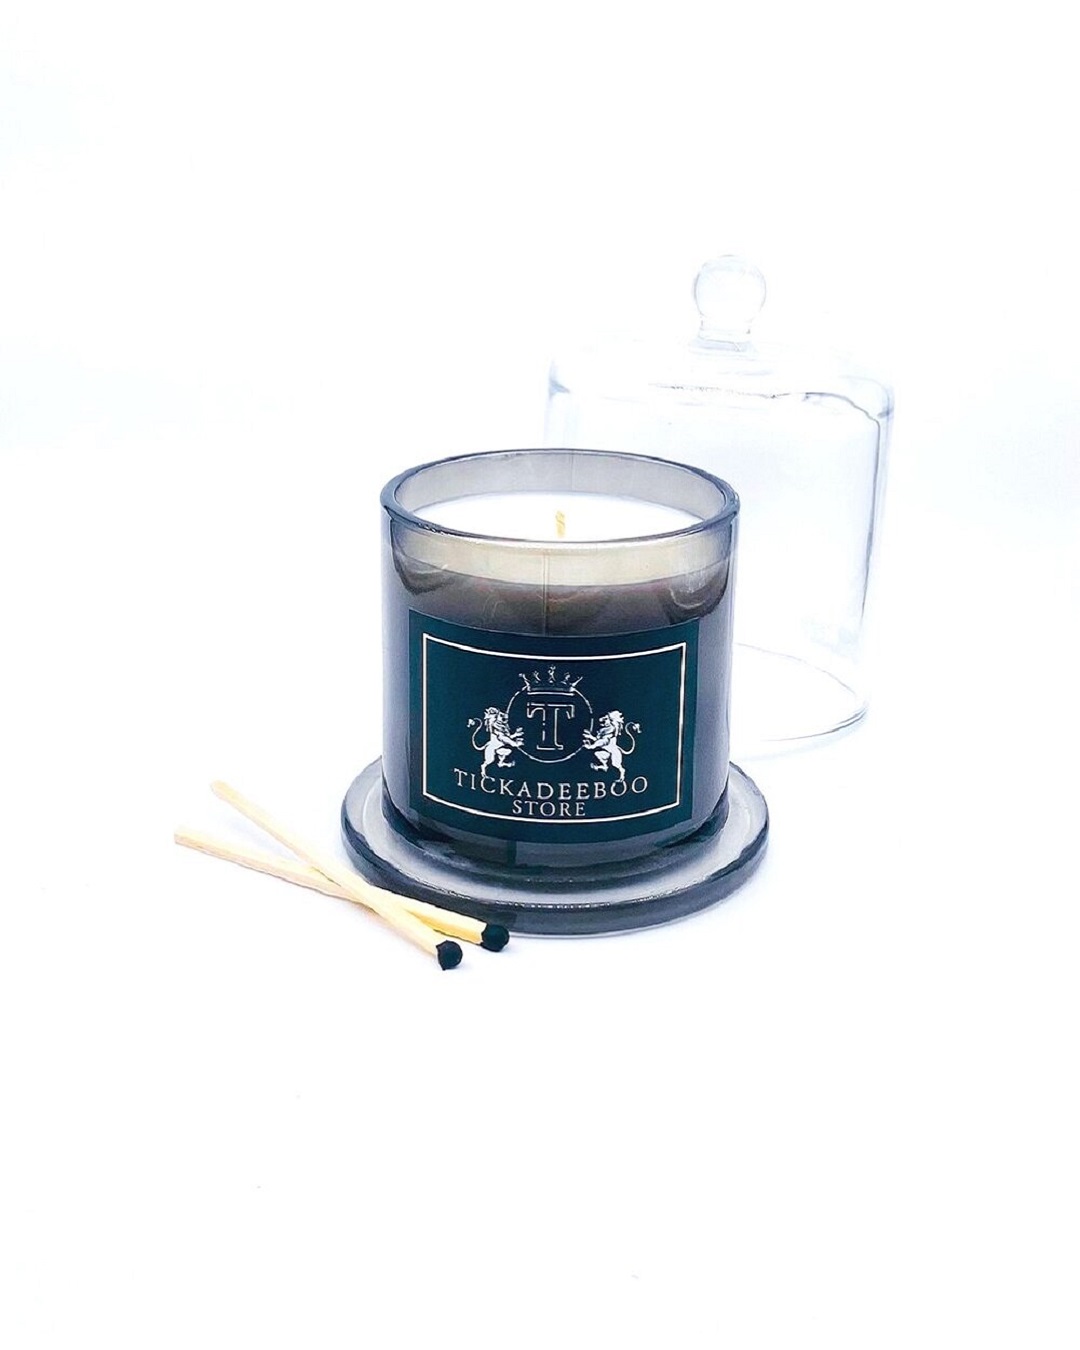 Black cloche candle with matches